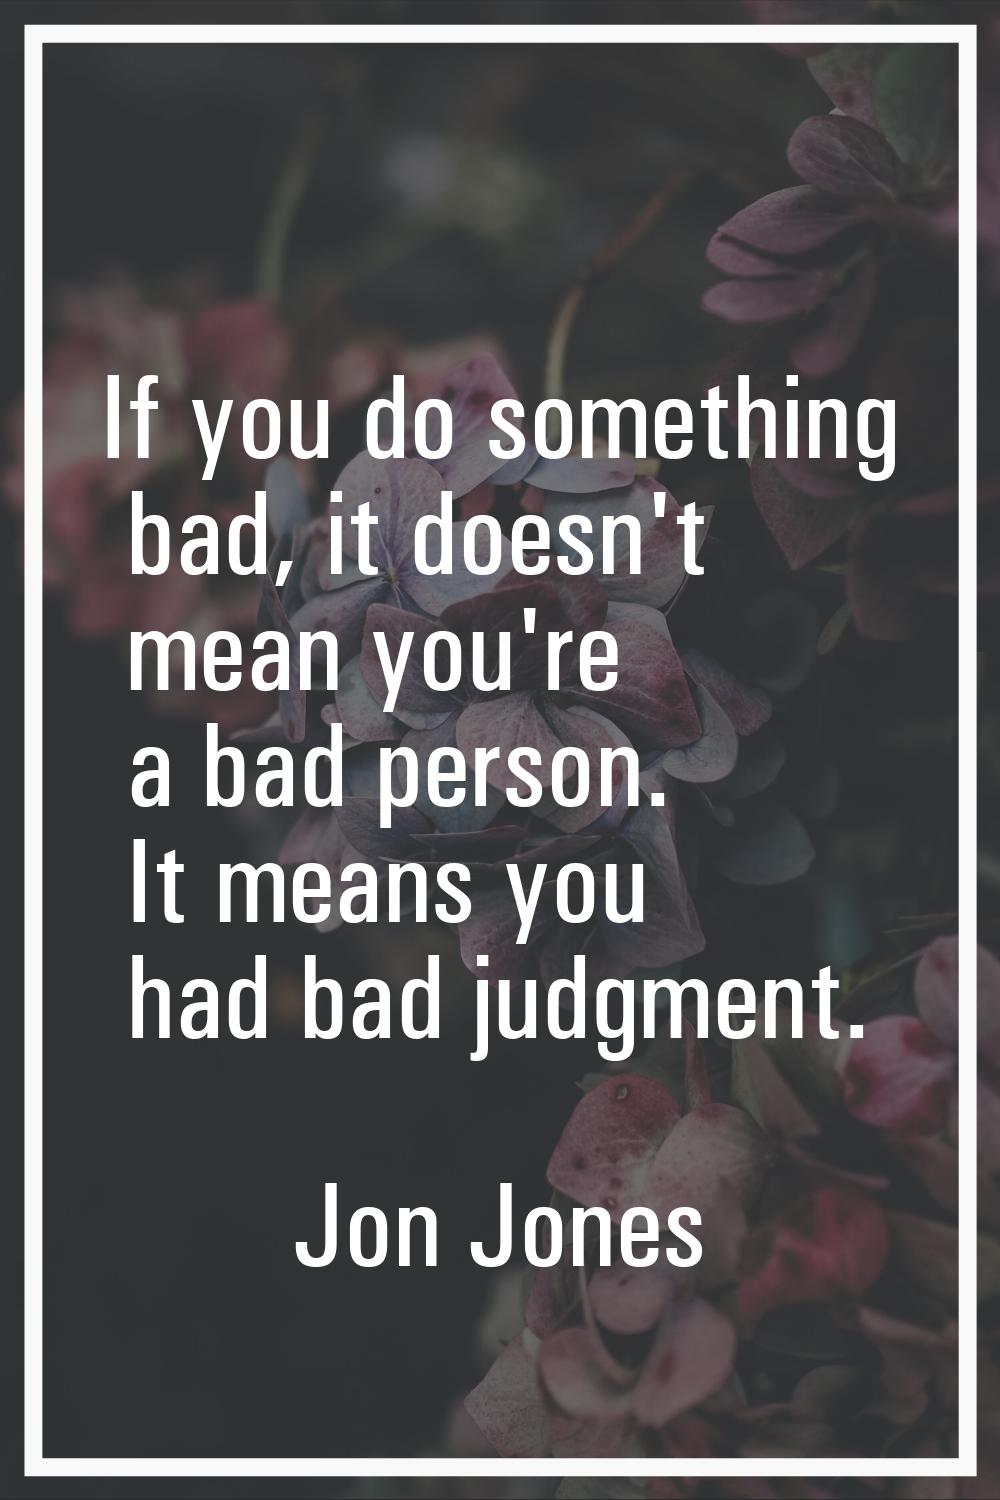 If you do something bad, it doesn't mean you're a bad person. It means you had bad judgment.